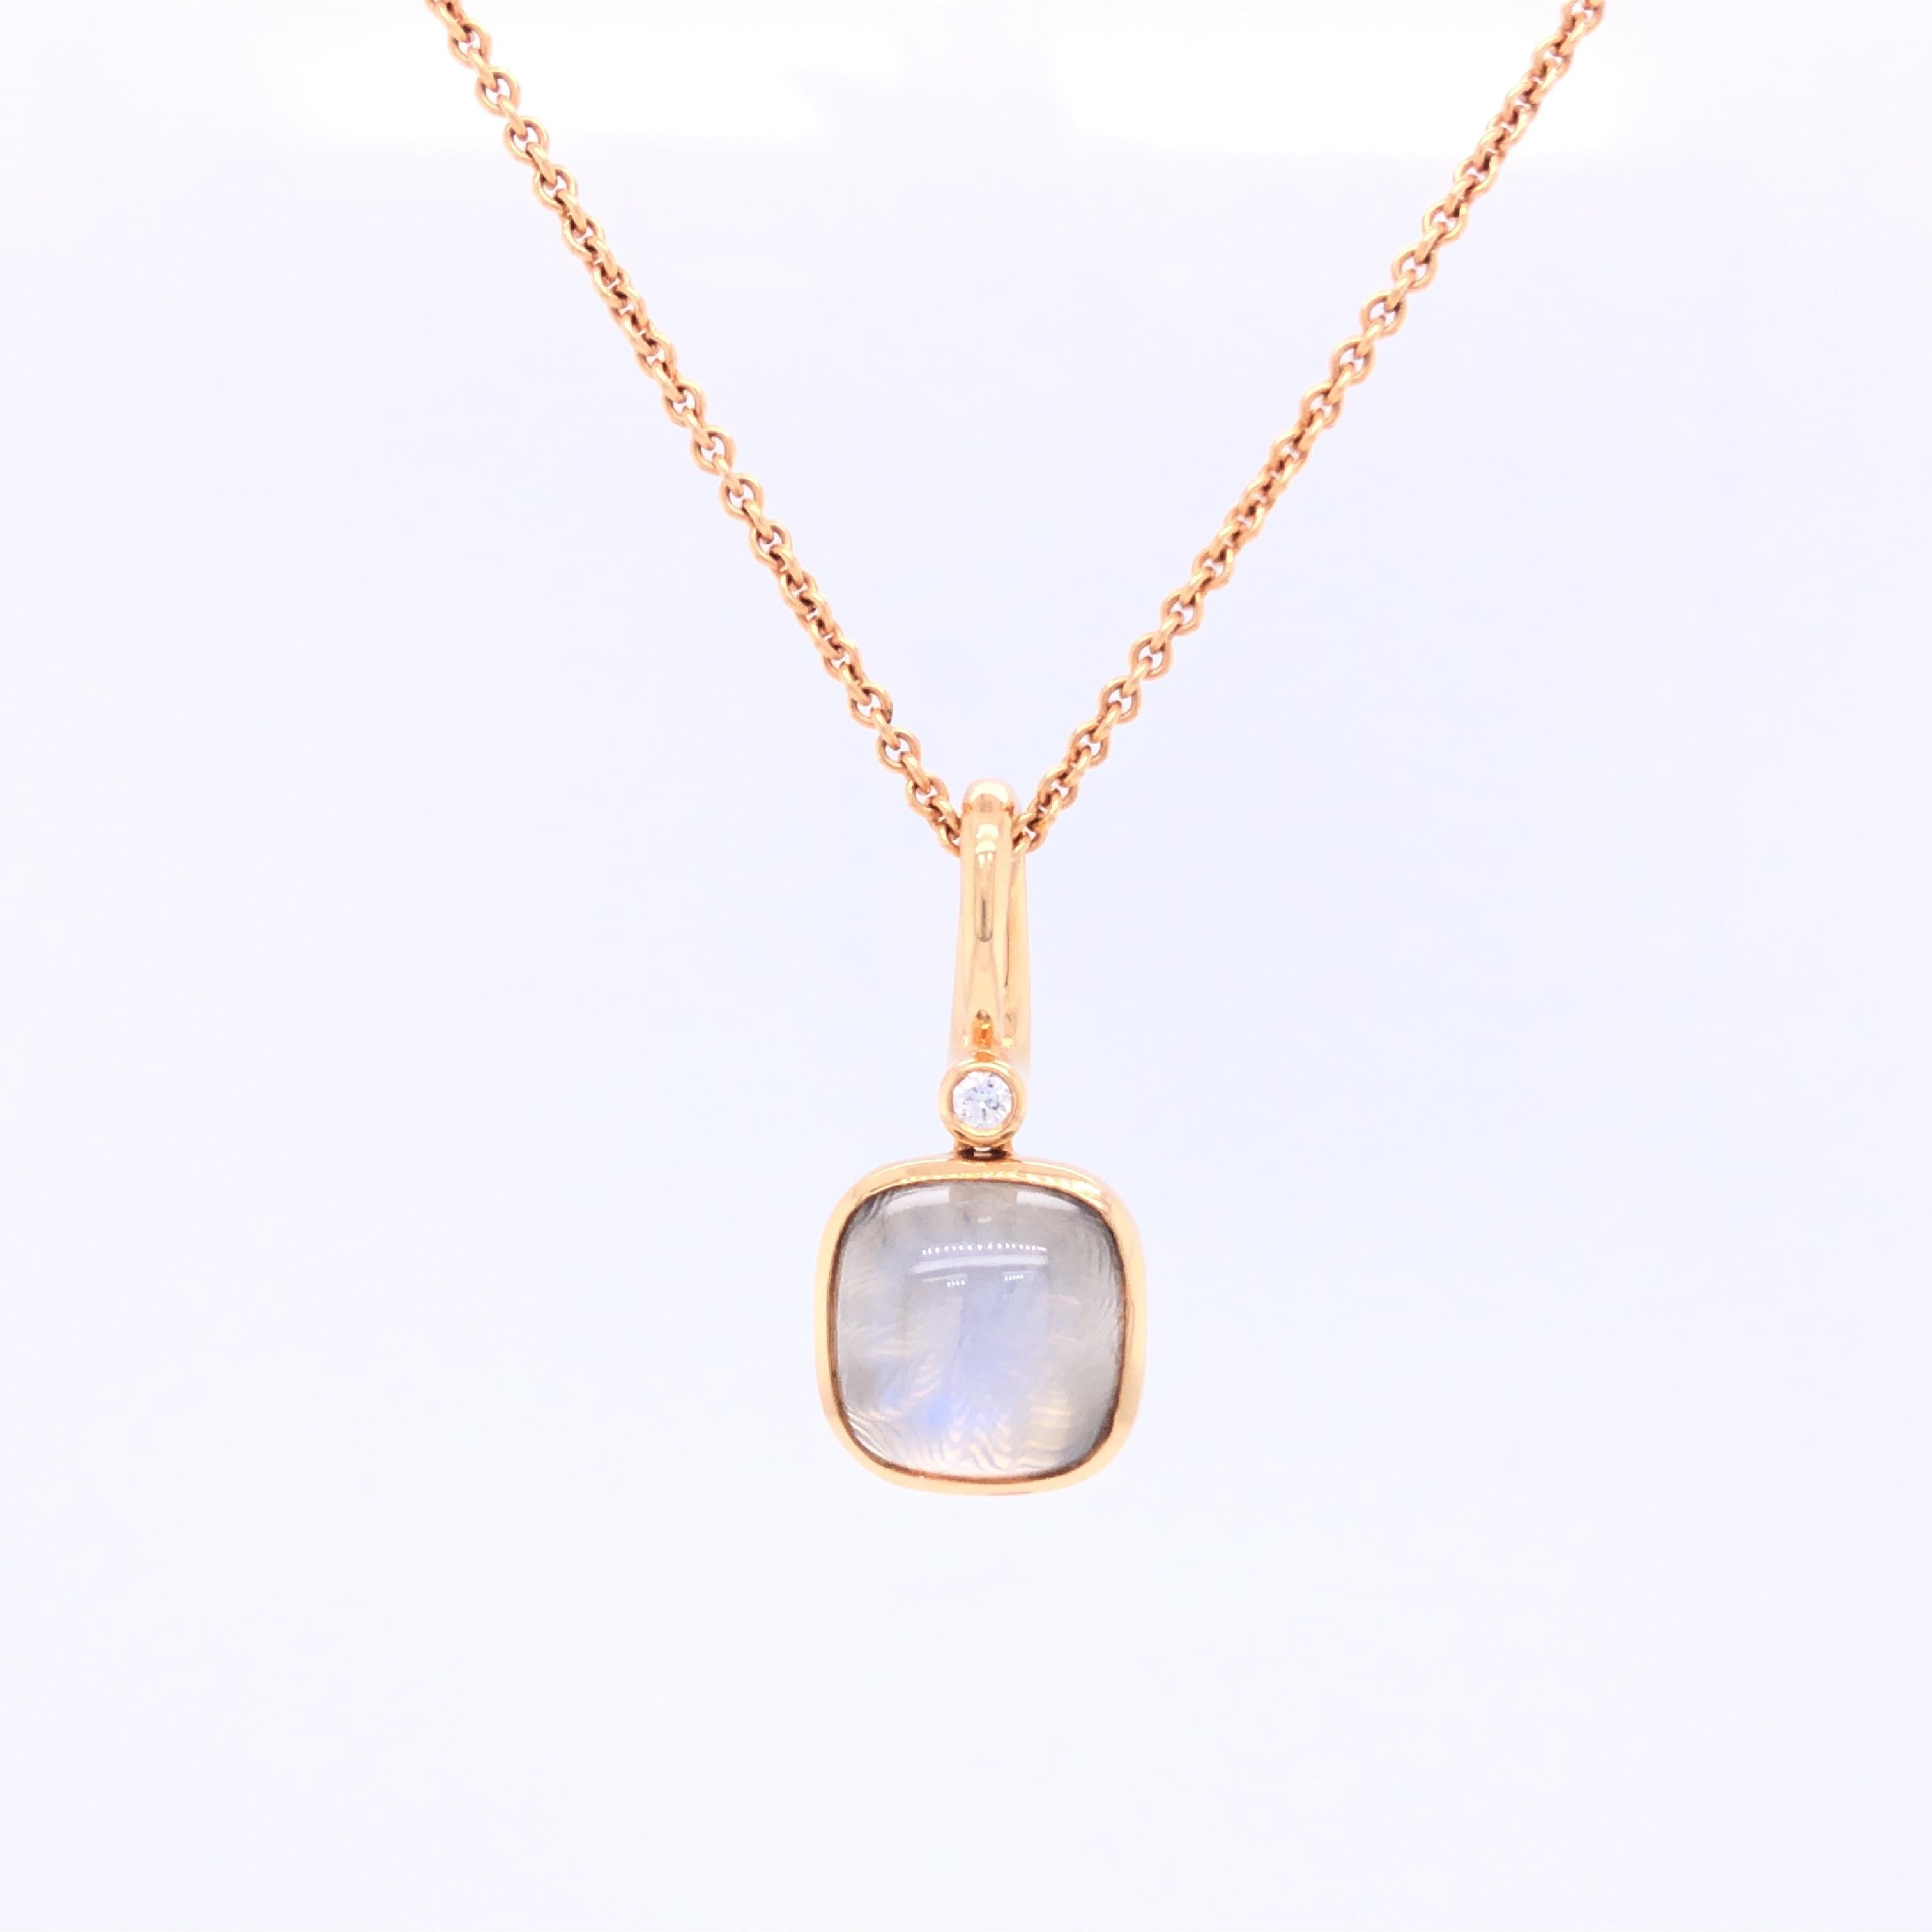 Victor Mayer square shaped pendant 18k rose gold, Era collection, 1 diamond 0.04 ct G VS brilliant cut, white moon stone over guilloche 18k gold disc

About the creator Victor Mayer
Victor Mayer is internationally renowned for elegant timeless